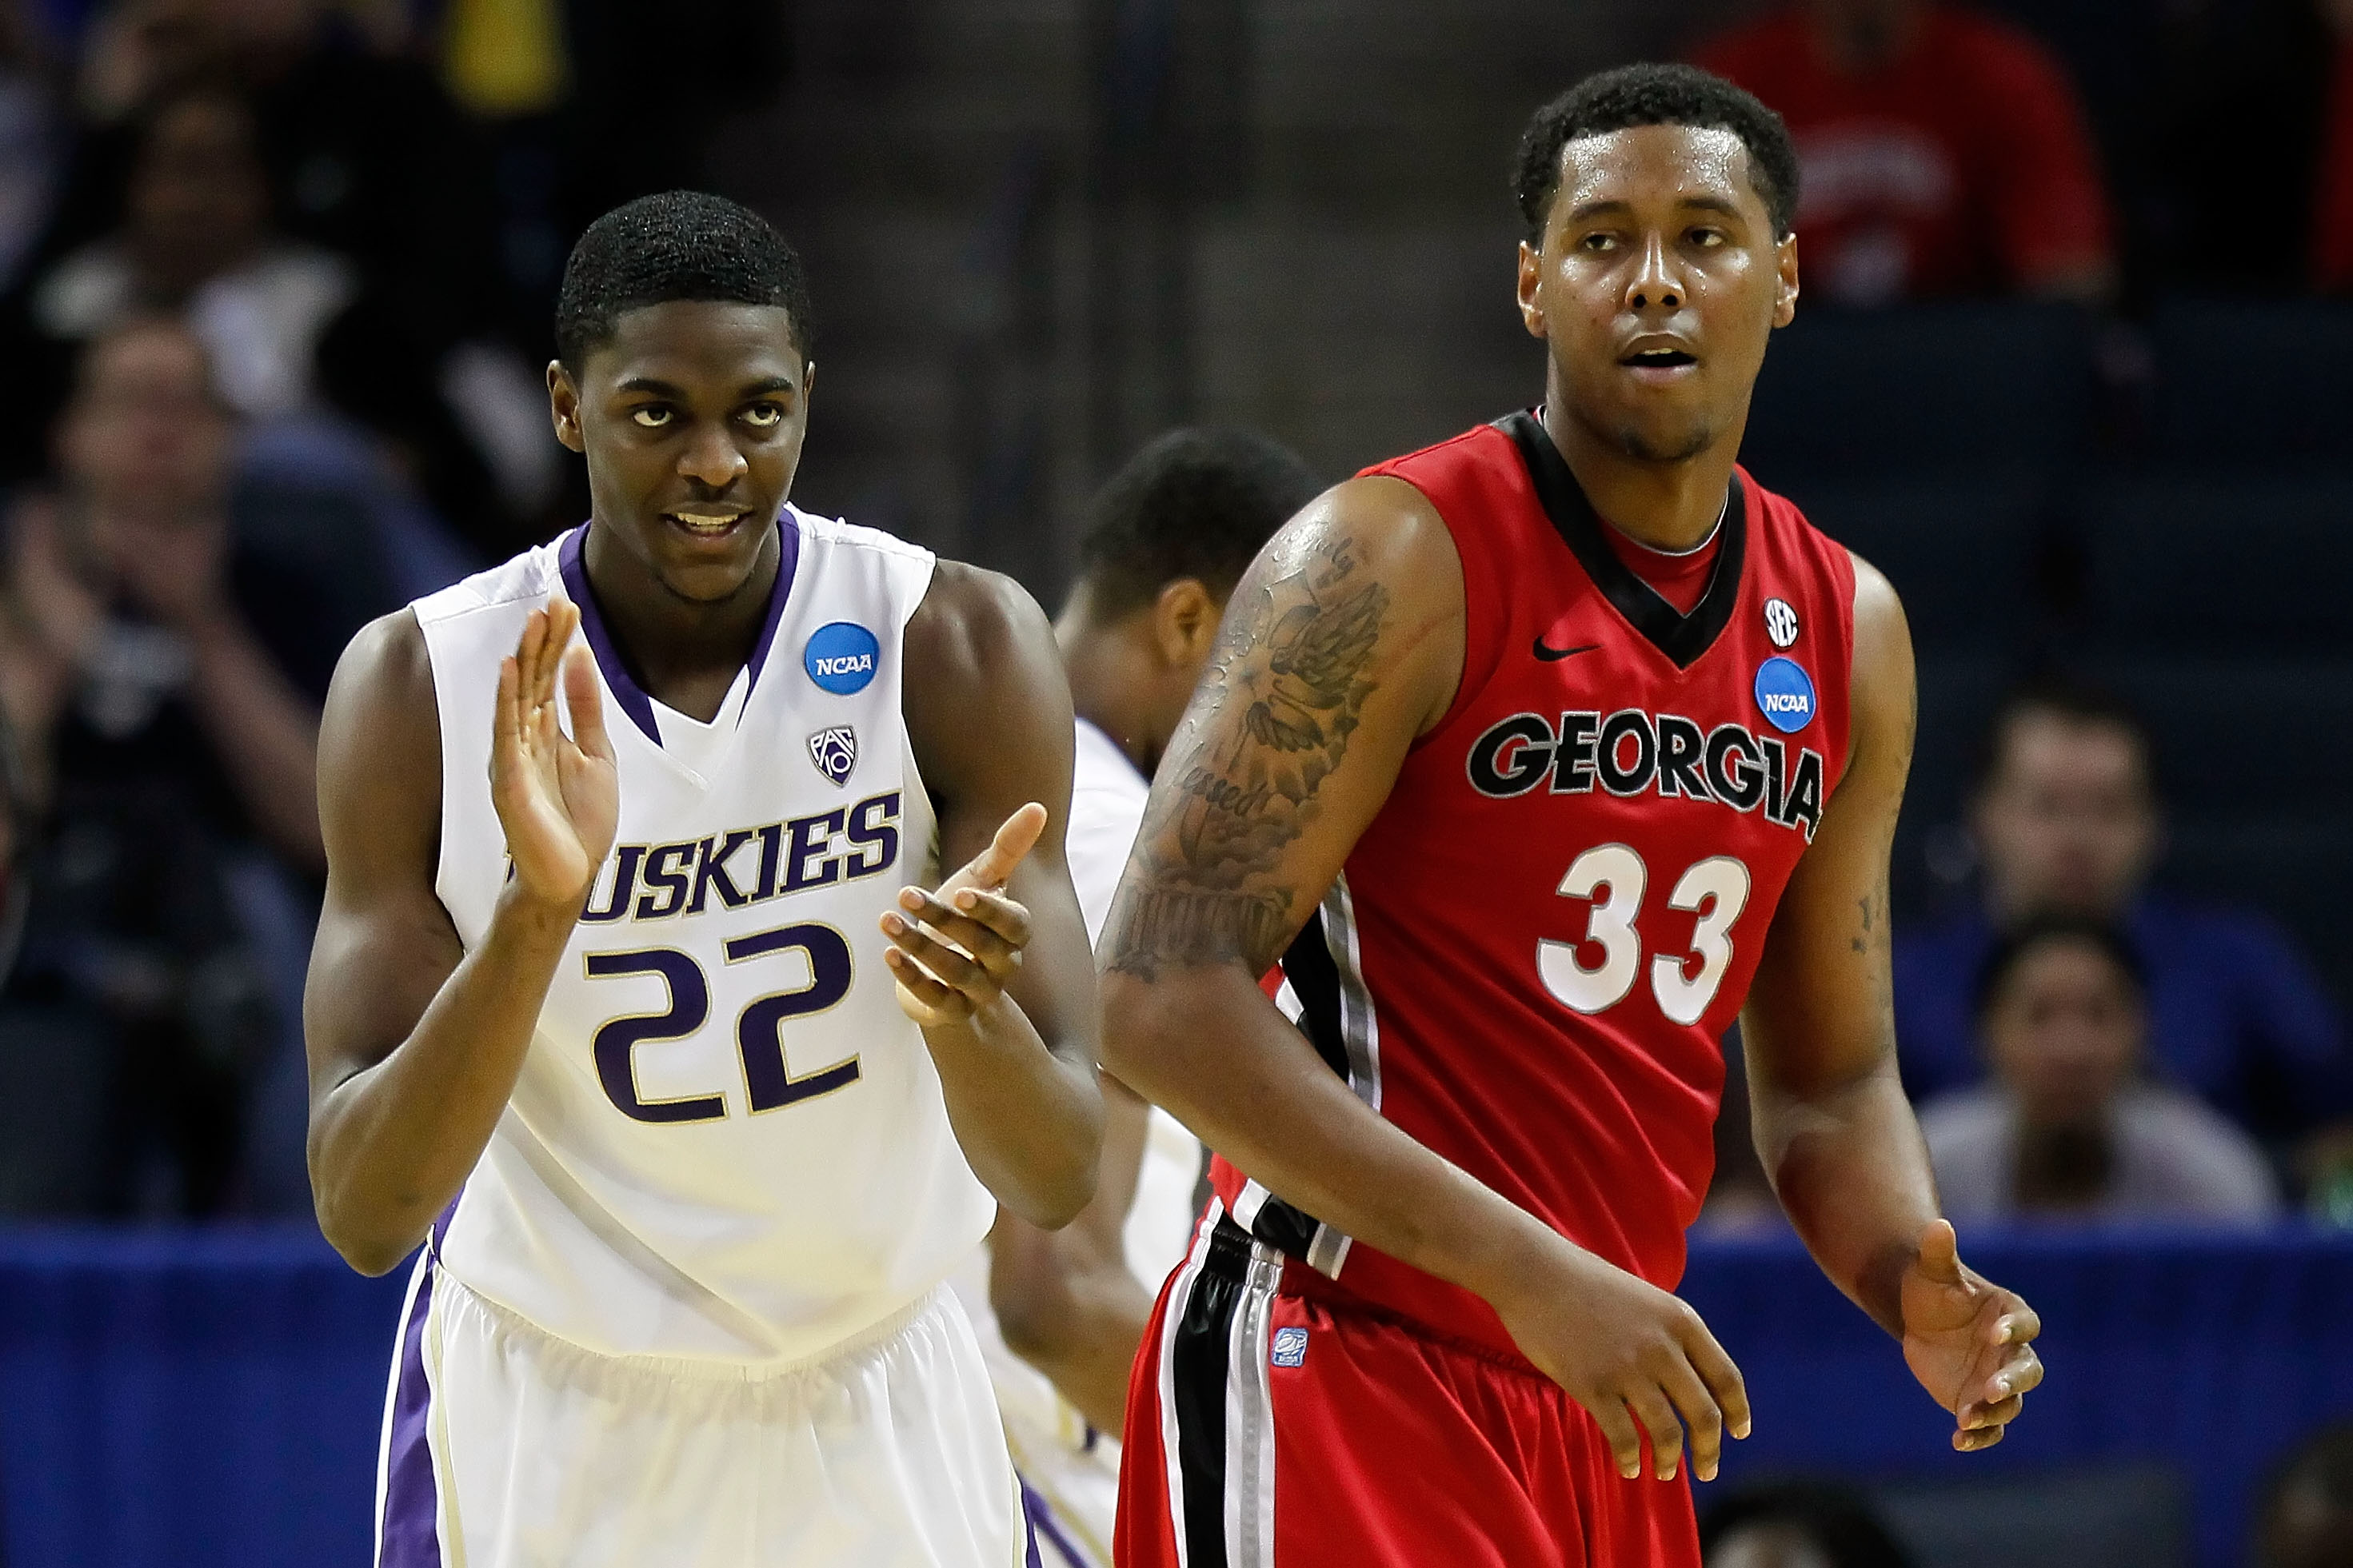 CHARLOTTE, NC - MARCH 18:  Justin Holiday #22 of the Washington Huskies reacts alongside Trey Thompkins #33 of the Georgia Bulldogs in the second half during the second round of the 2011 NCAA men's basketball tournament at Time Warner Cable Arena on March